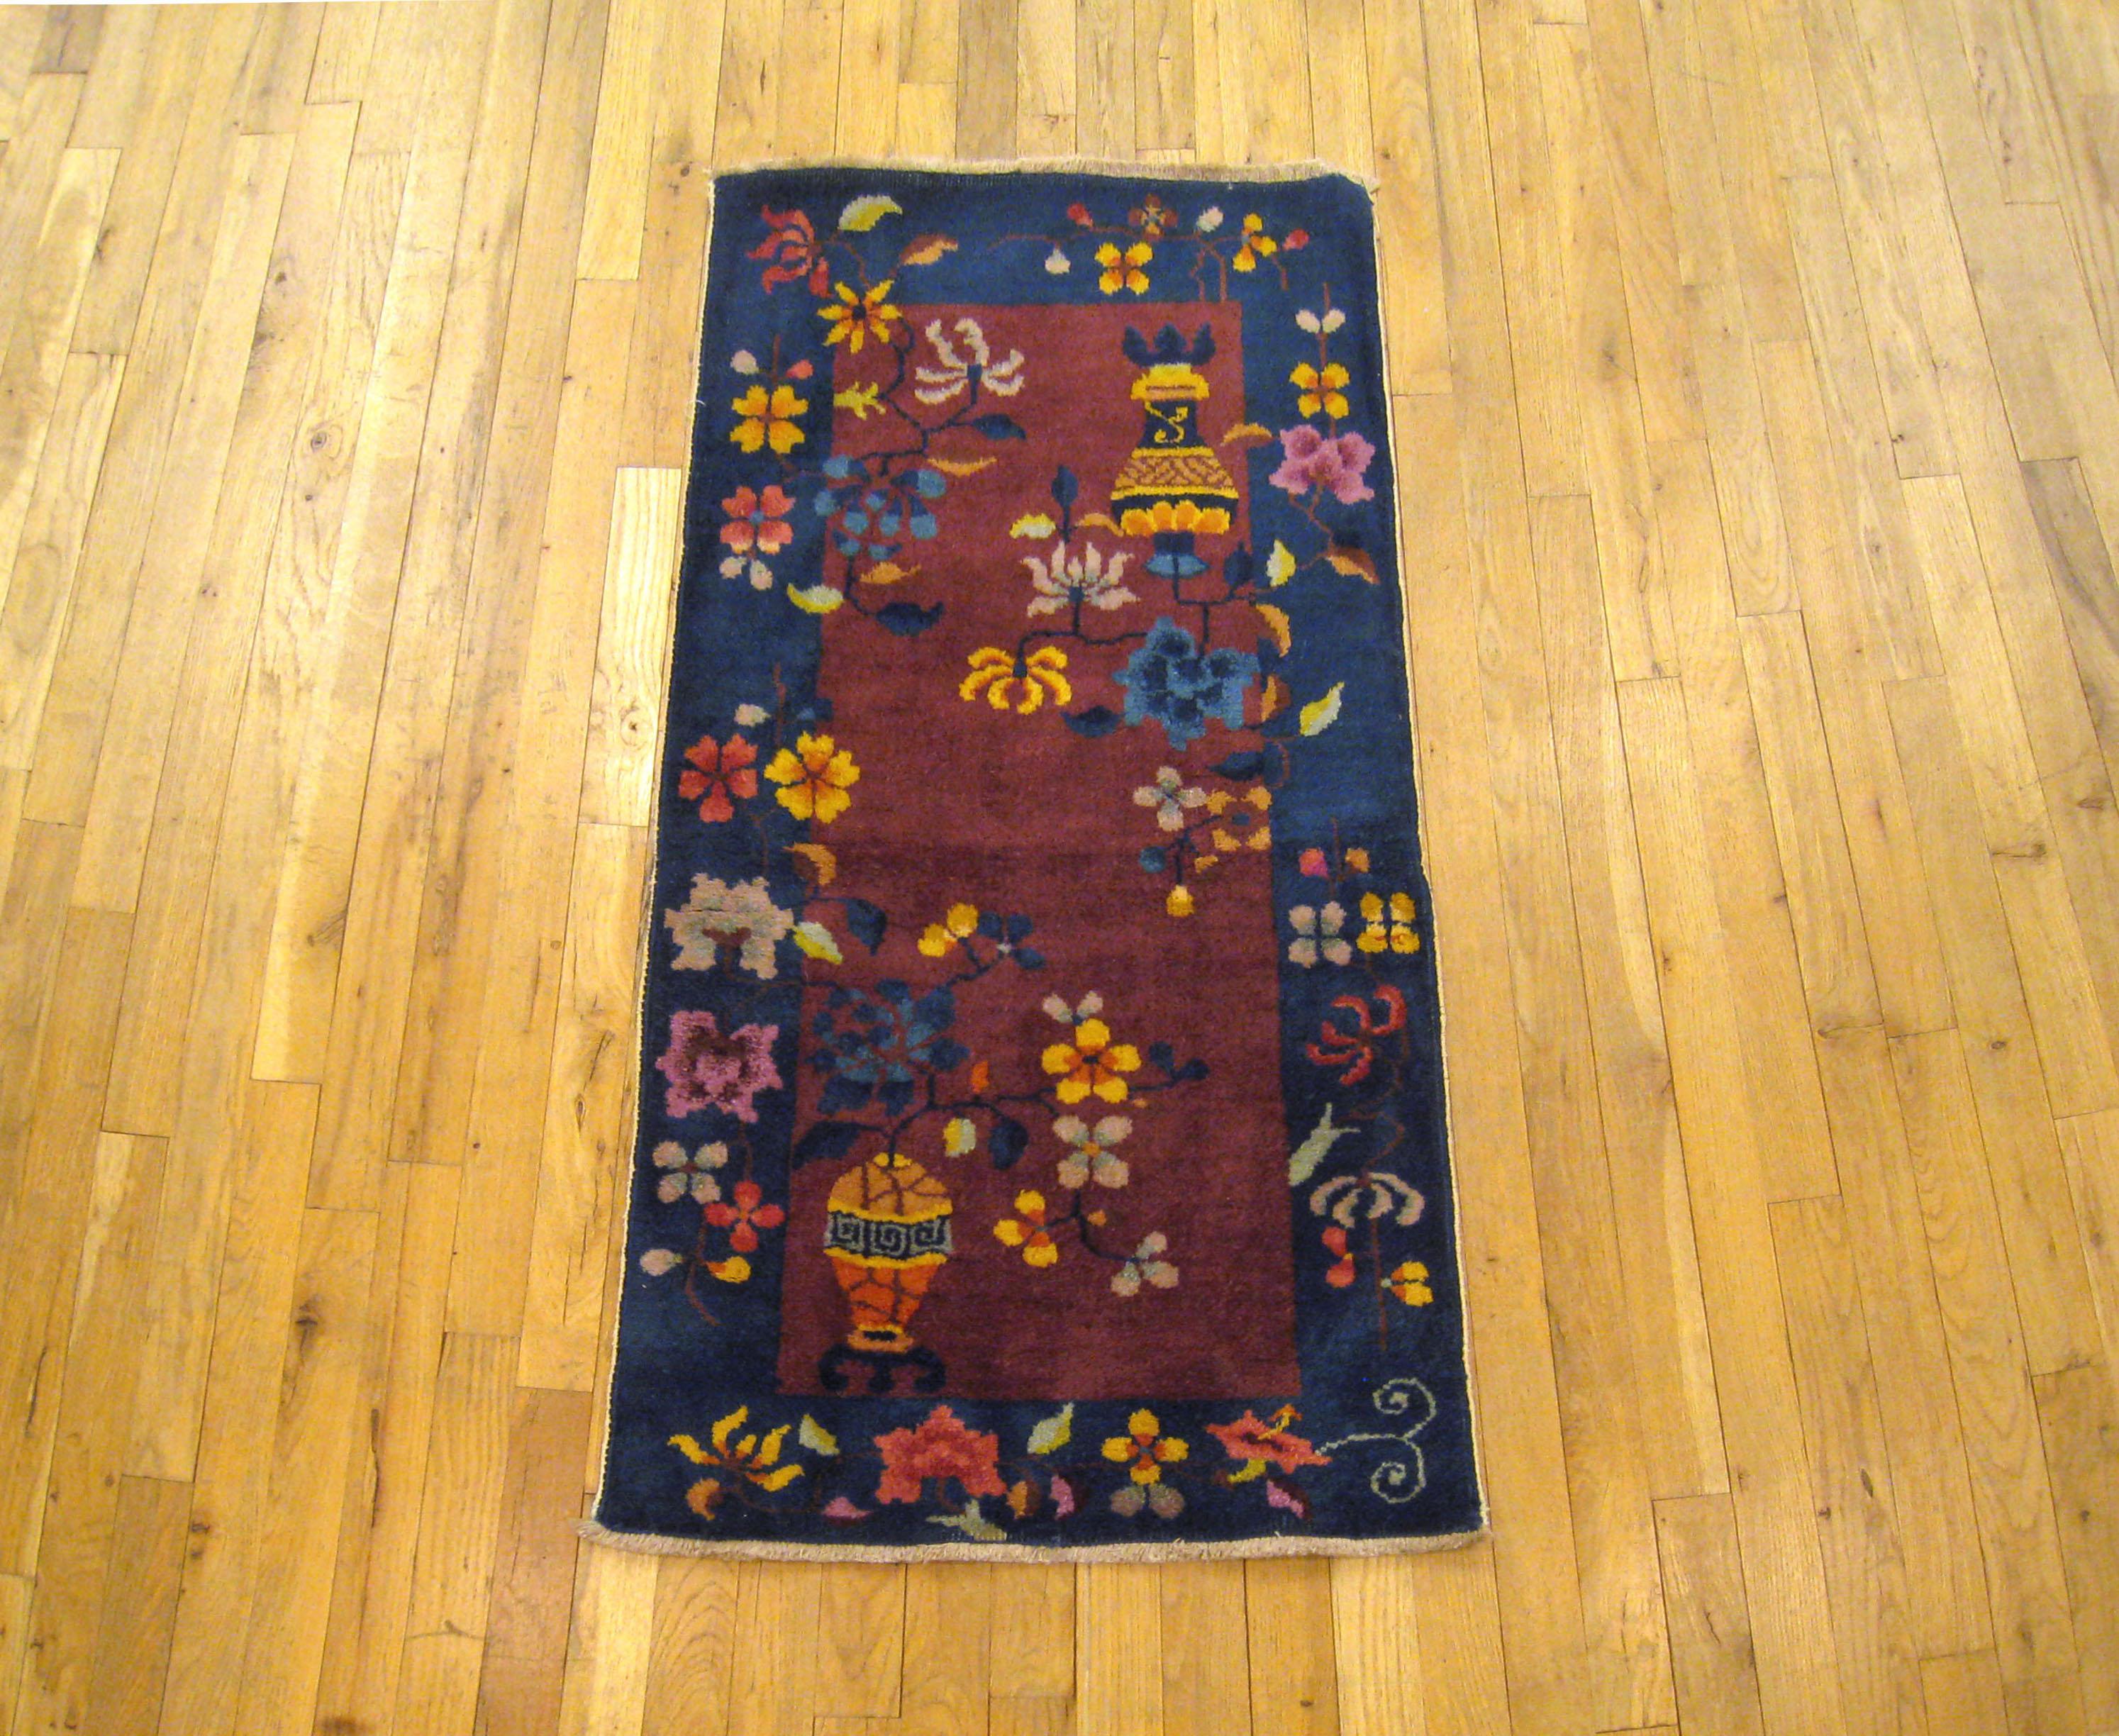 An antique Chinese Art Deco oriental rug, size 4'0 x 2'0, circa 1920. This lovely hand-knotted antique carpet features various traditional Chinese motifs in the central field, including uniquely rendered vases with flowers. Handmade, with short to